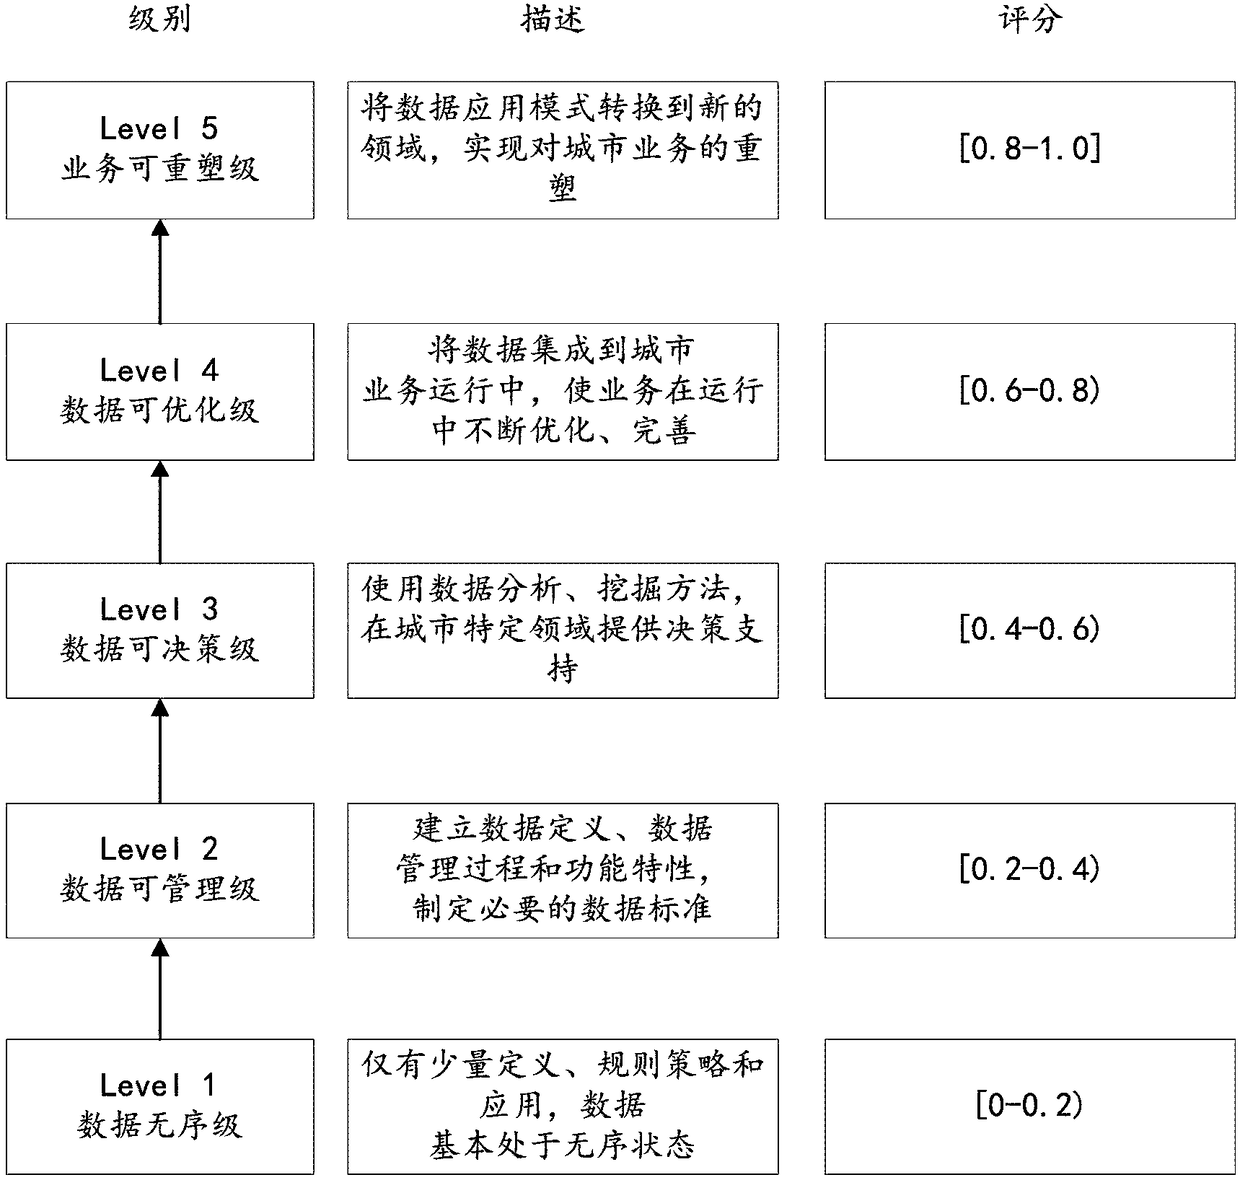 City data maturity evaluation method and system